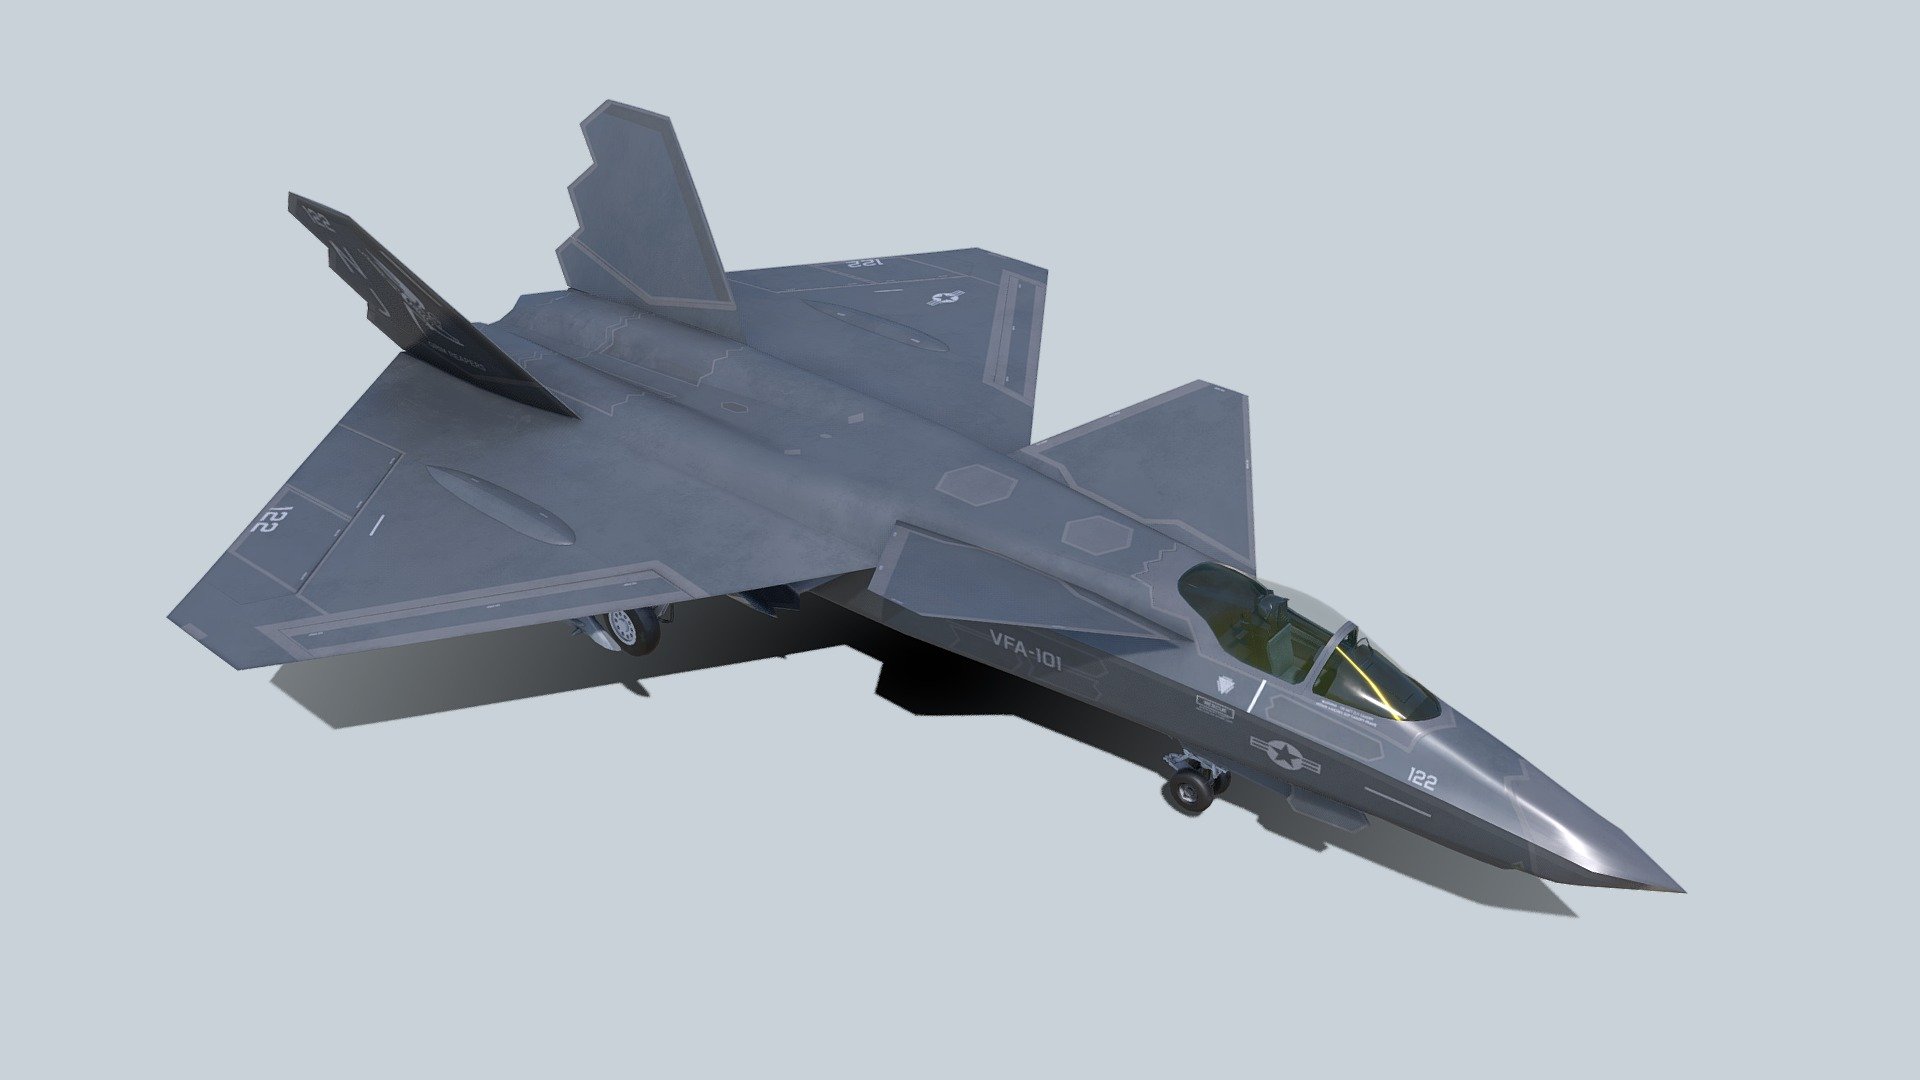 A proposed naval variant of the YF-23 known as the NATF-23 was considered as an F-14 Tomcat replacement. The original YF-23 design was first considered but would have had issues with flight deck space handling, storage, landing, and catapult launching reasons requiring a different design. A NATF-23 wind tunnel test model DP527, tested for 14,000 hours, was donated by Boeing in 2001 to the Bellefontaine Neighbors Klein Park Veterans Memorial - YF-23 naval NATF-23 - Buy Royalty Free 3D model by Tim Samedov (@citizensnip) 3d model